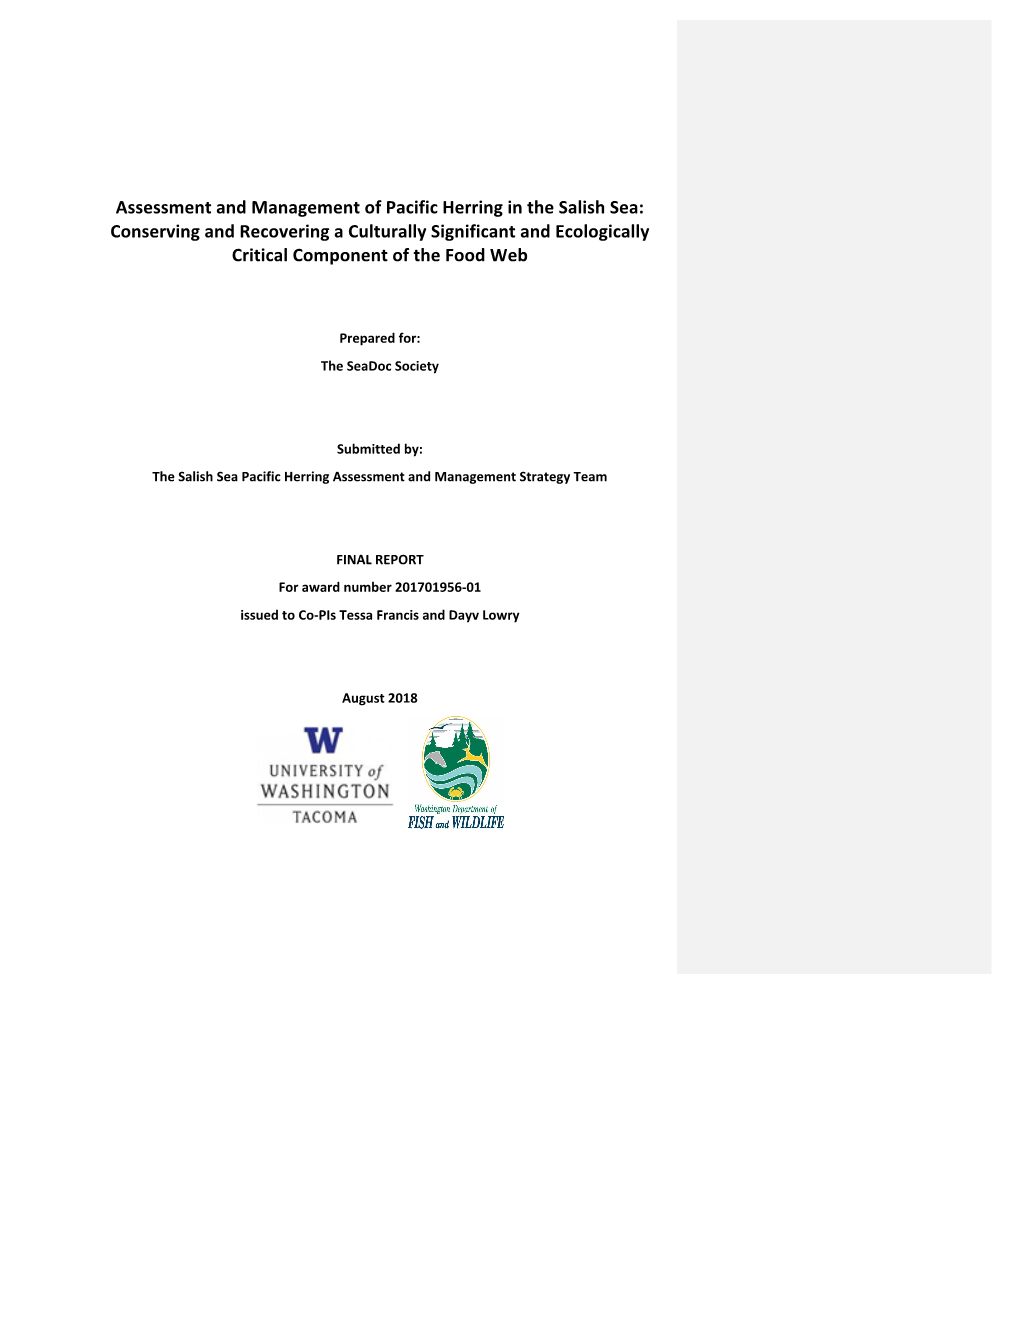 Assessment and Management of Pacific Herring in the Salish